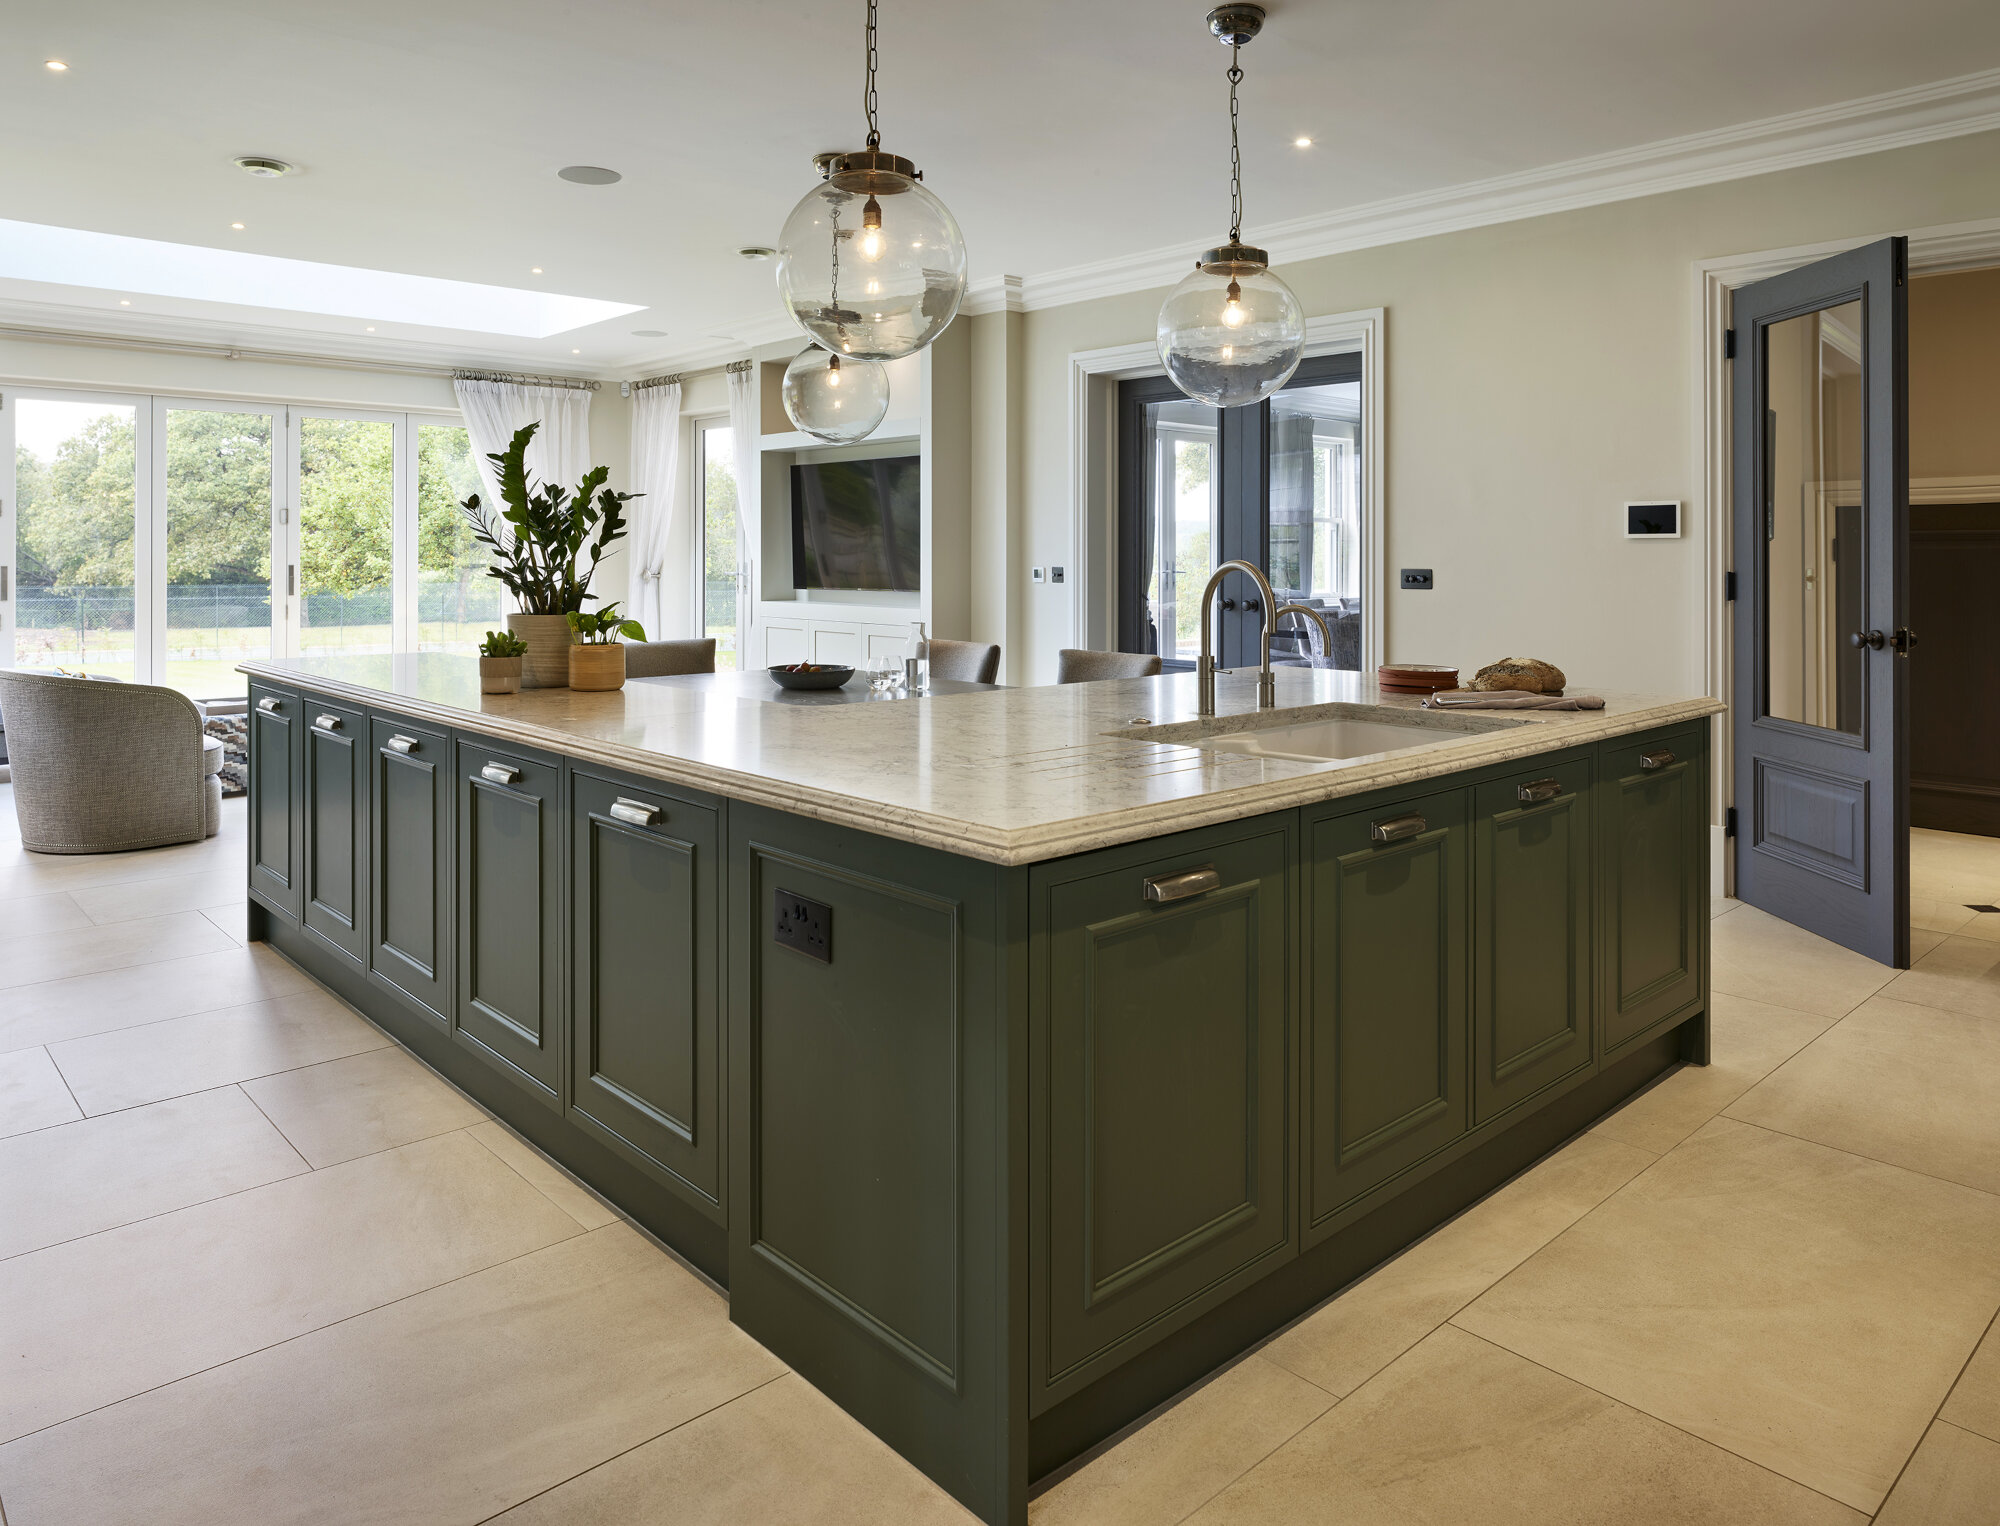 High End traditional Kitchens In Spalding